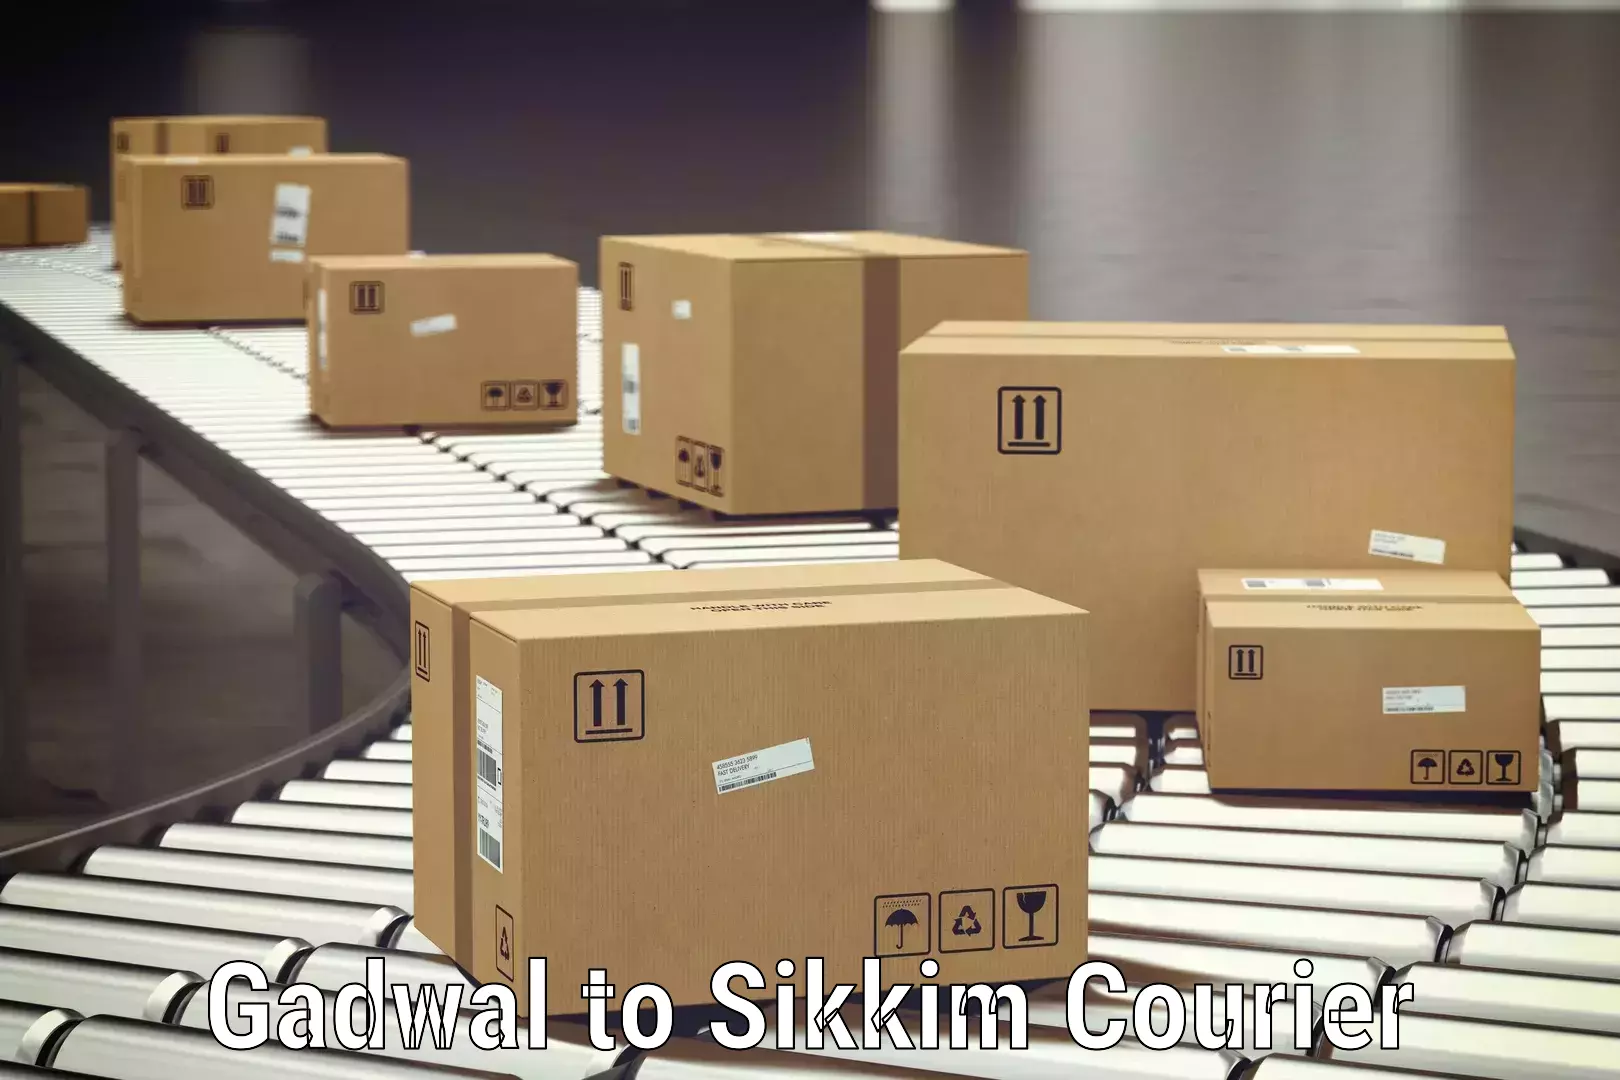 Luggage shipment tracking Gadwal to Sikkim